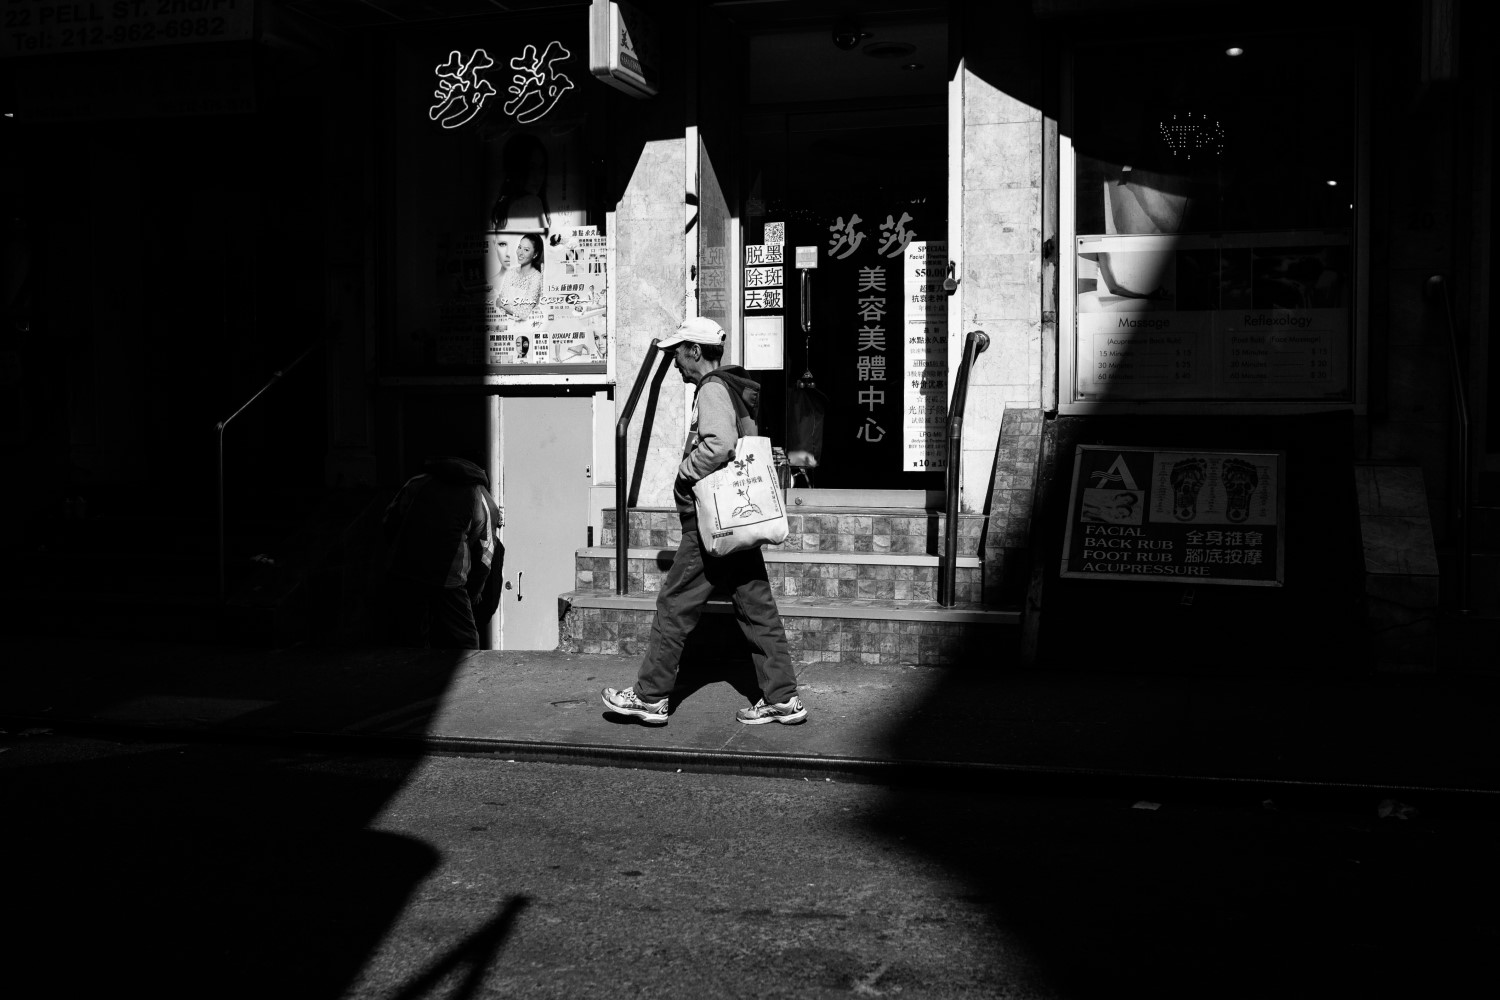 Lighting in street photography